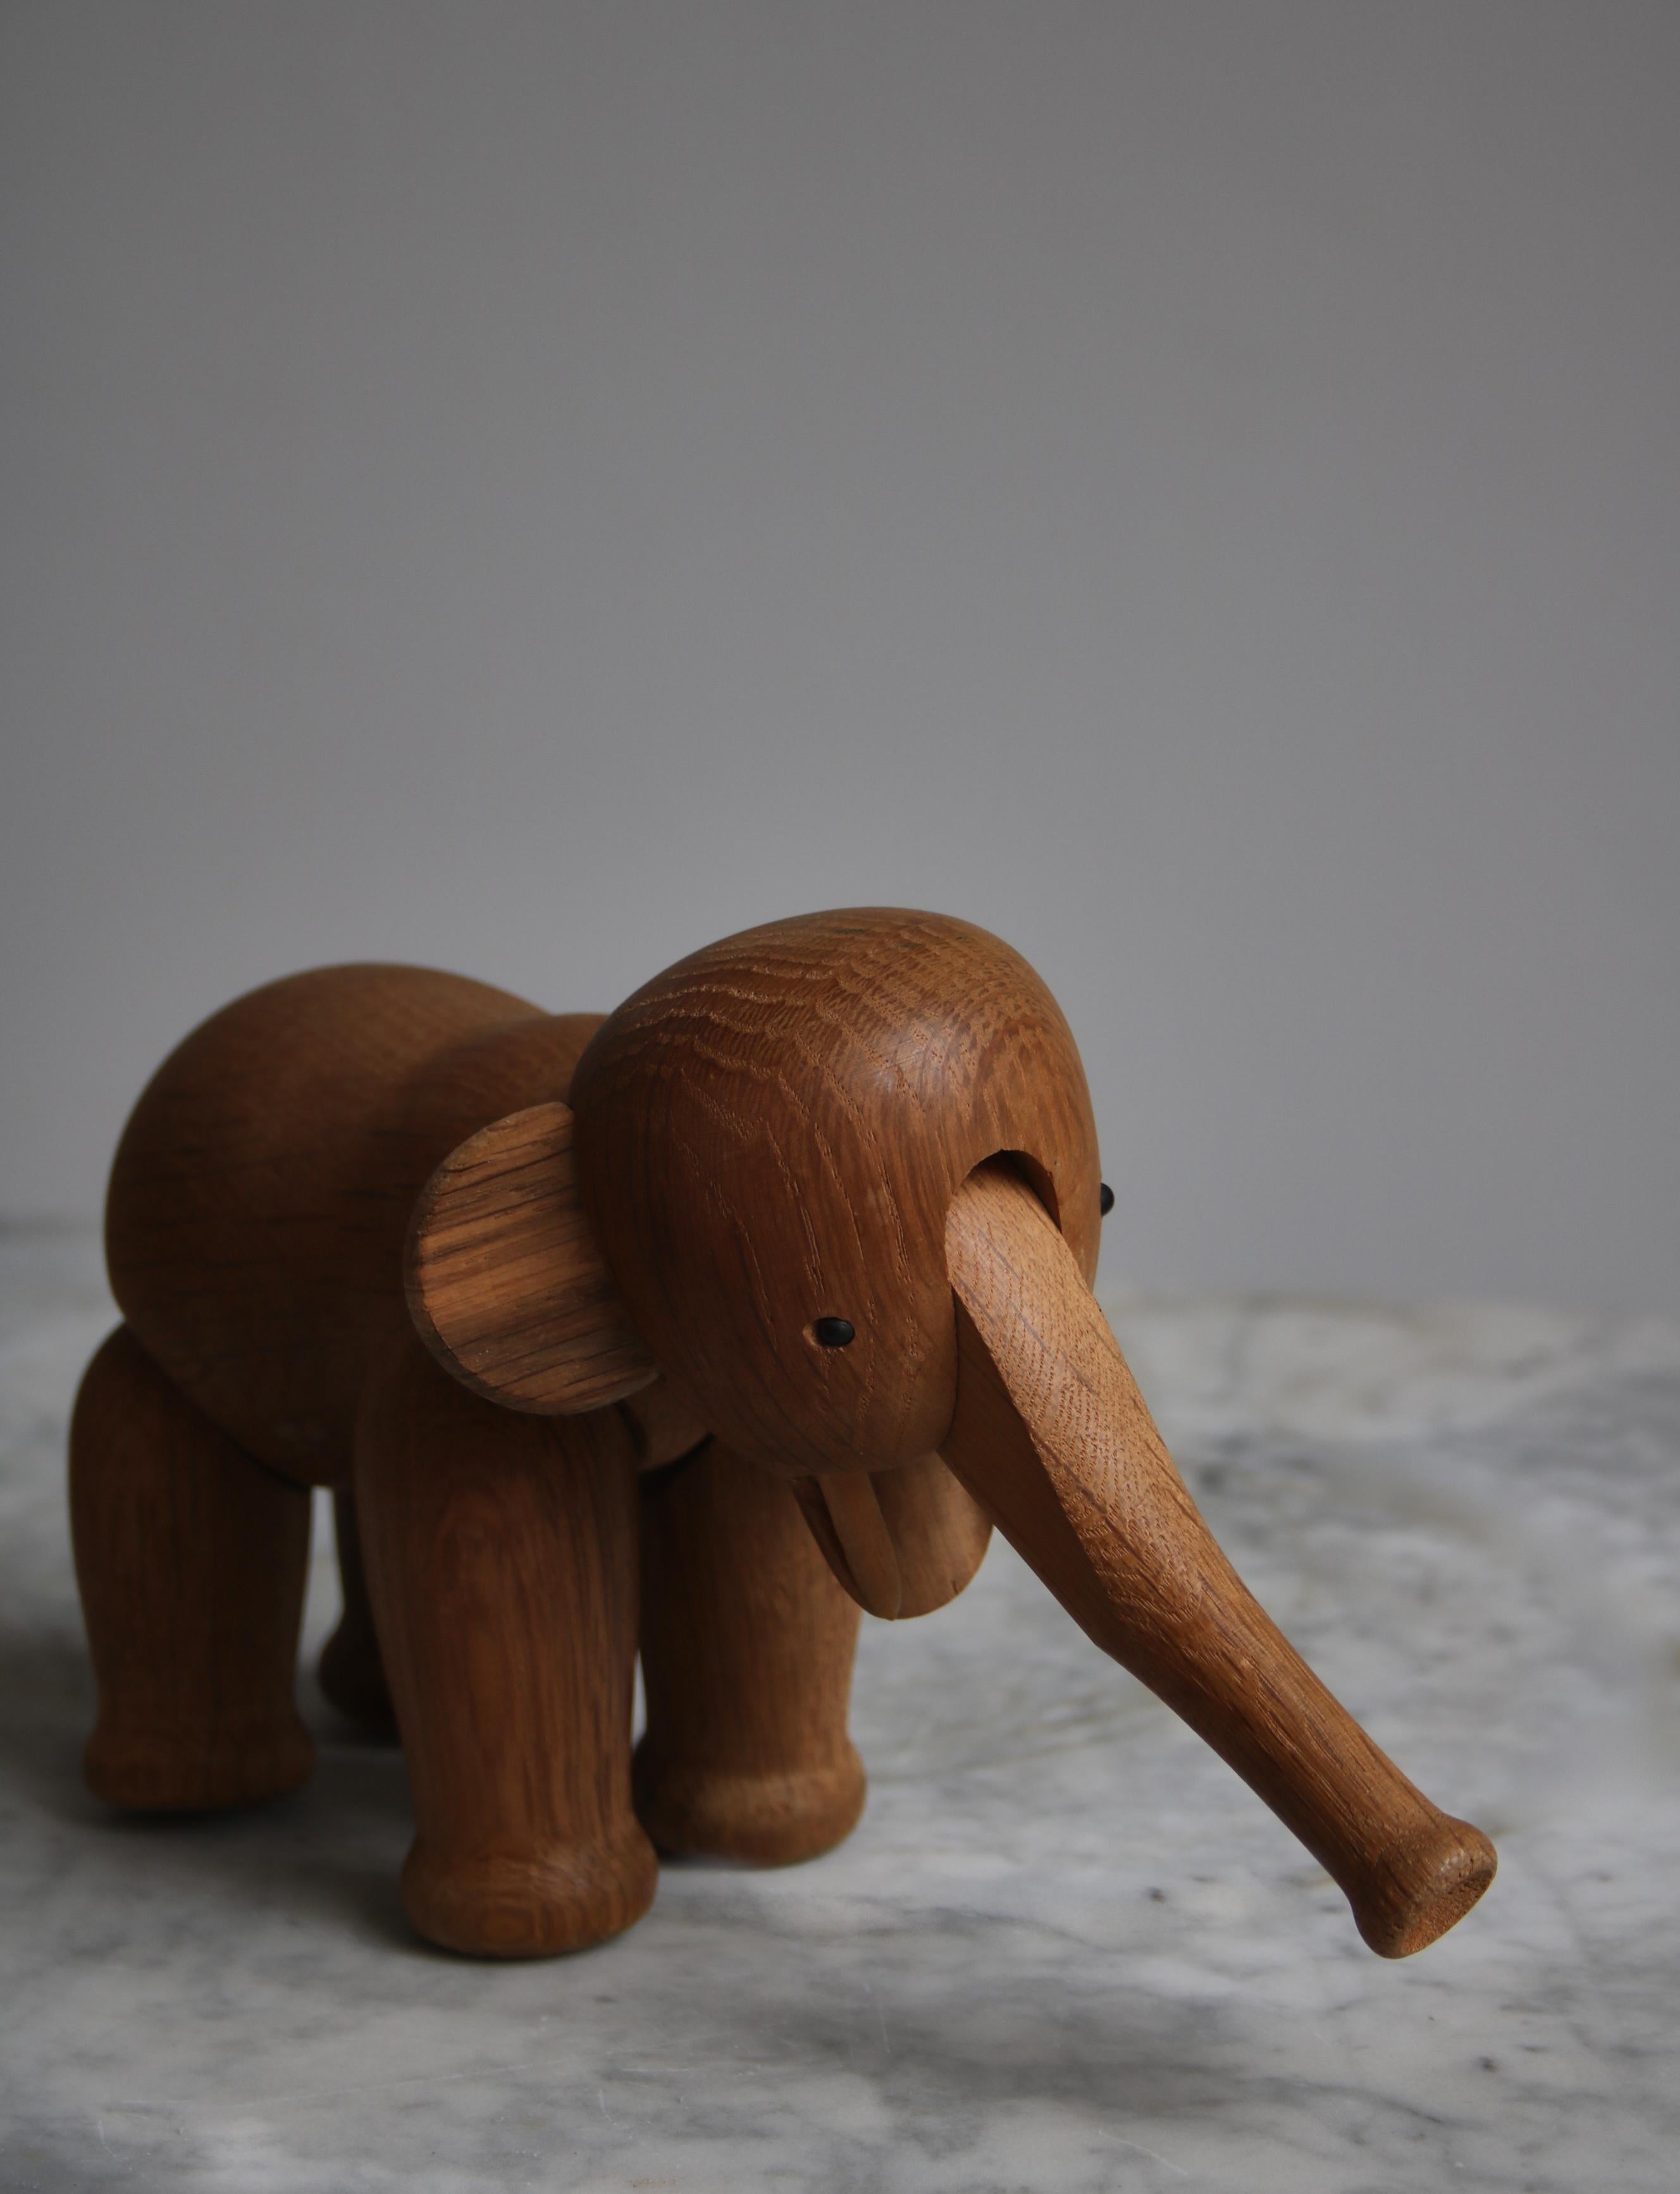 Rare Kay Bojesen wooden toy elephant from the early 1950s in patinated oak with an amazing grain. The Elephant was created in 1953 by Kay Bojesen and from the start handmade in his small workshop in Copenhagen, Denmark. The Stamp underneath the food